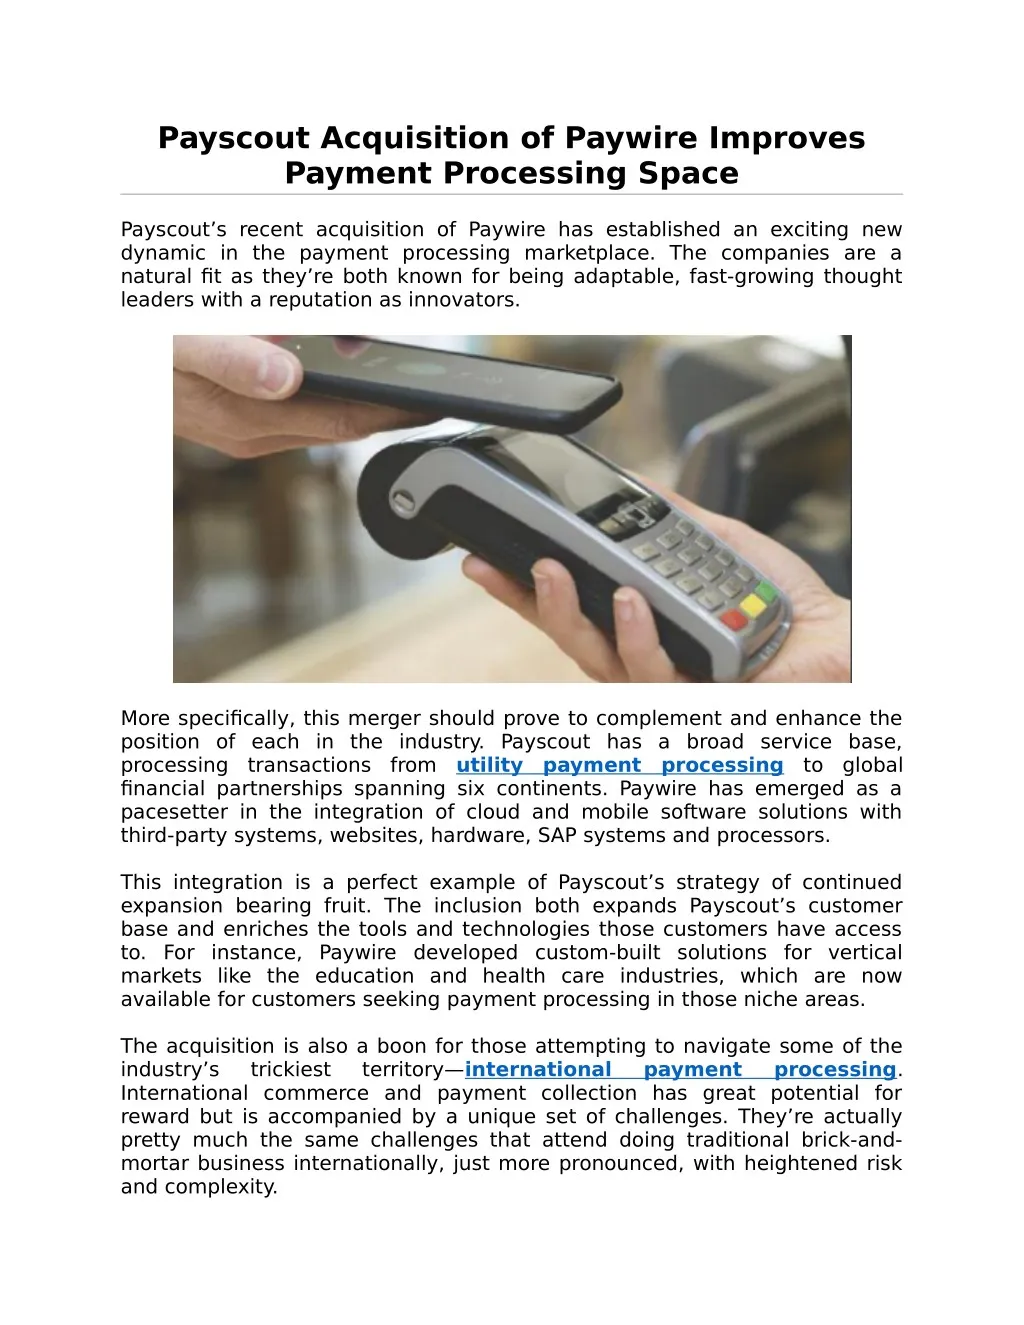 payscout acquisition of paywire improves payment